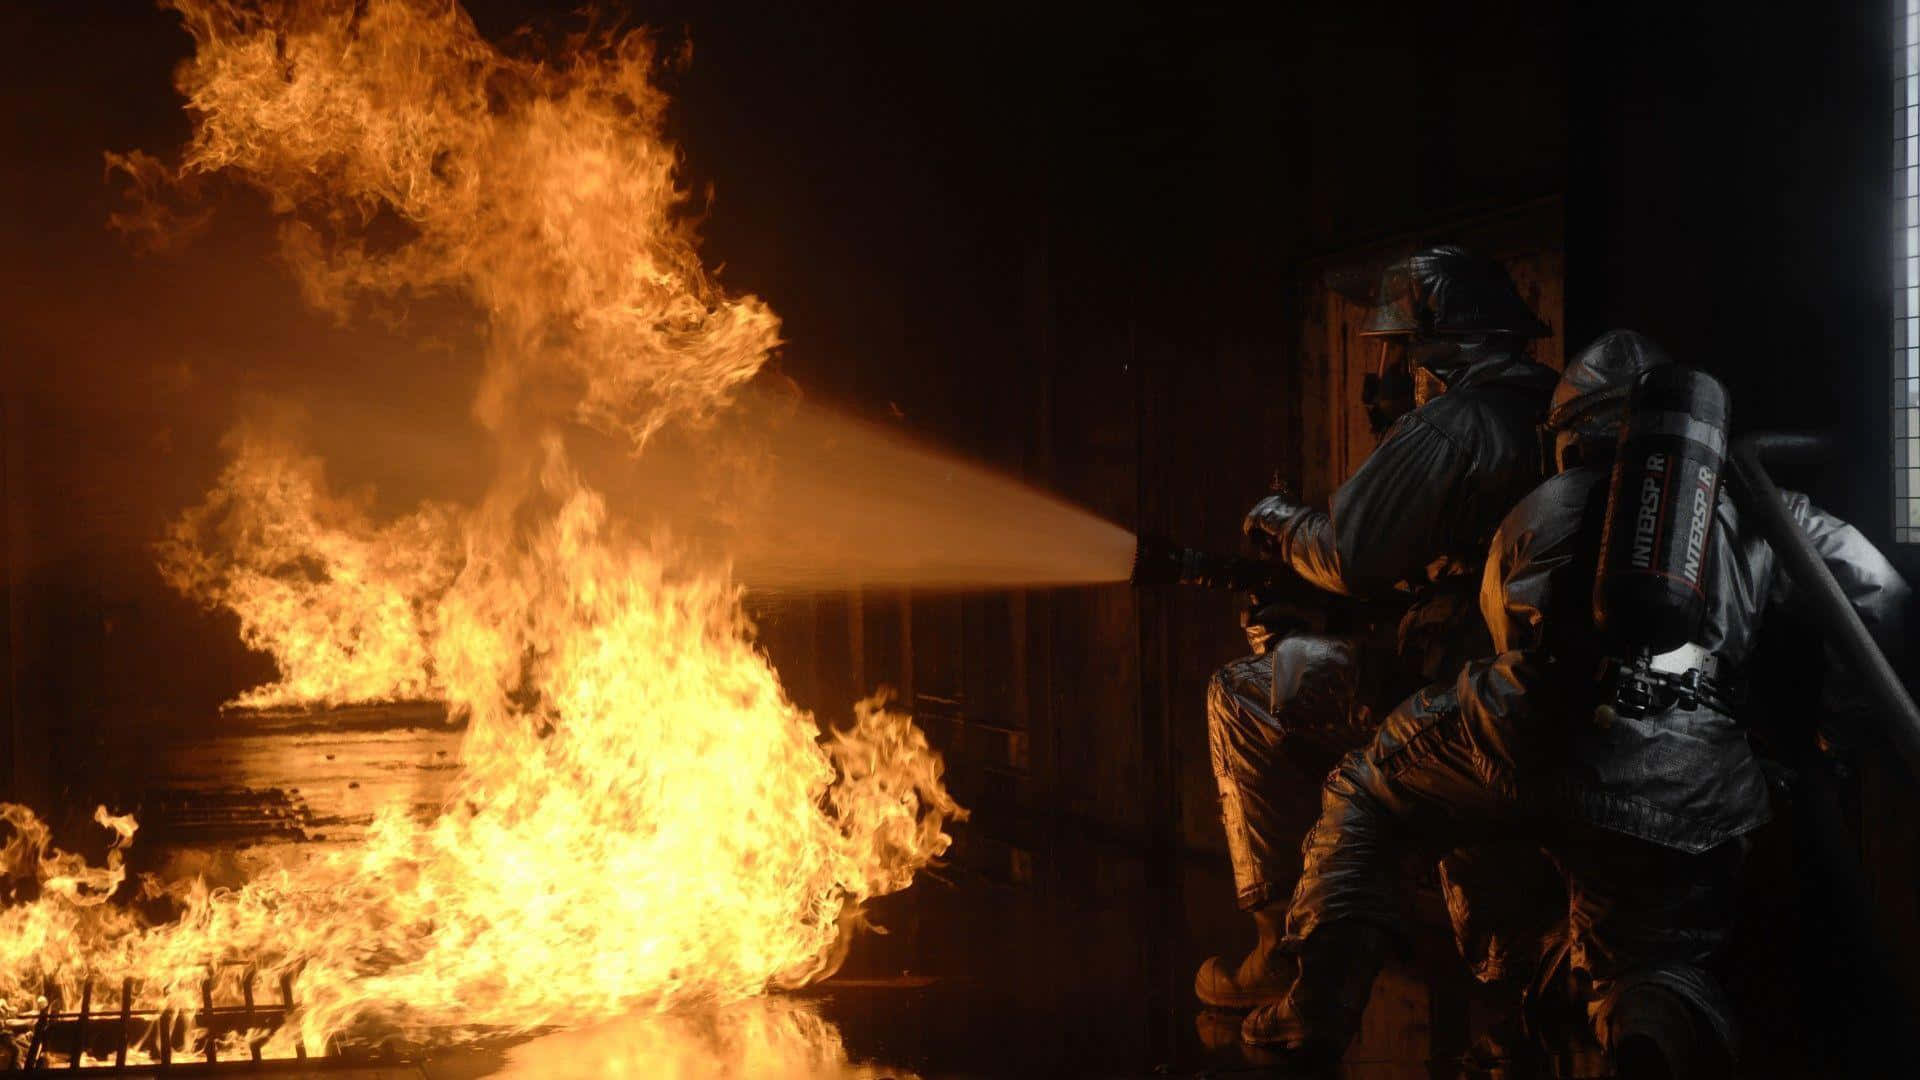 A Firefighter Preparing To Enter A Burning Building